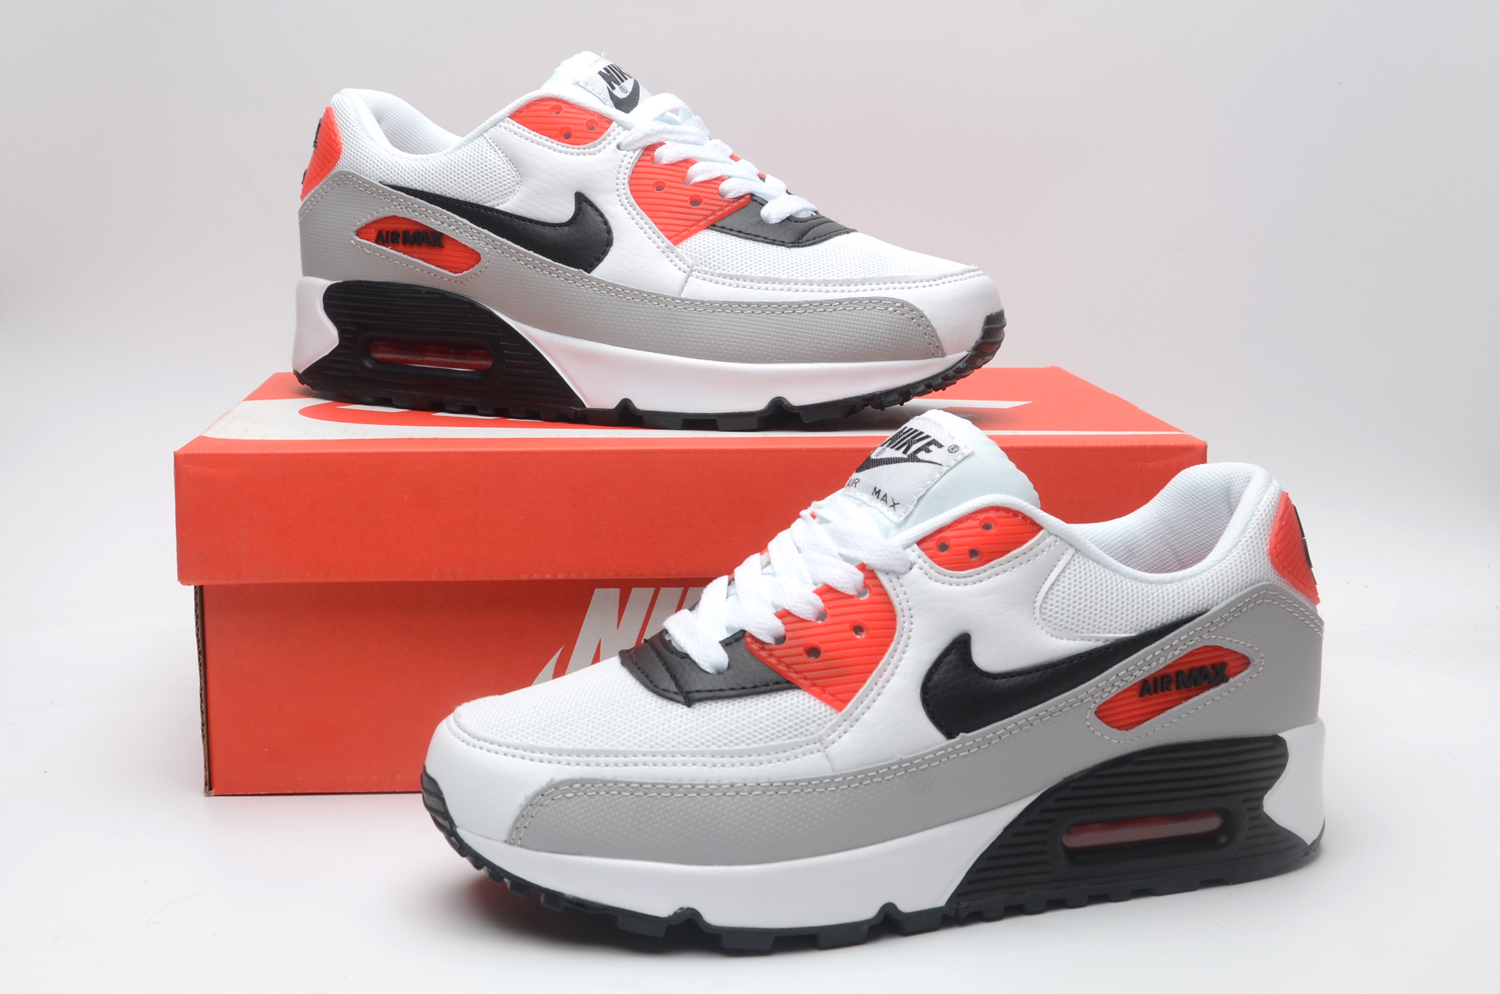 Men's Running weapon Air Max 90 Shoes 047